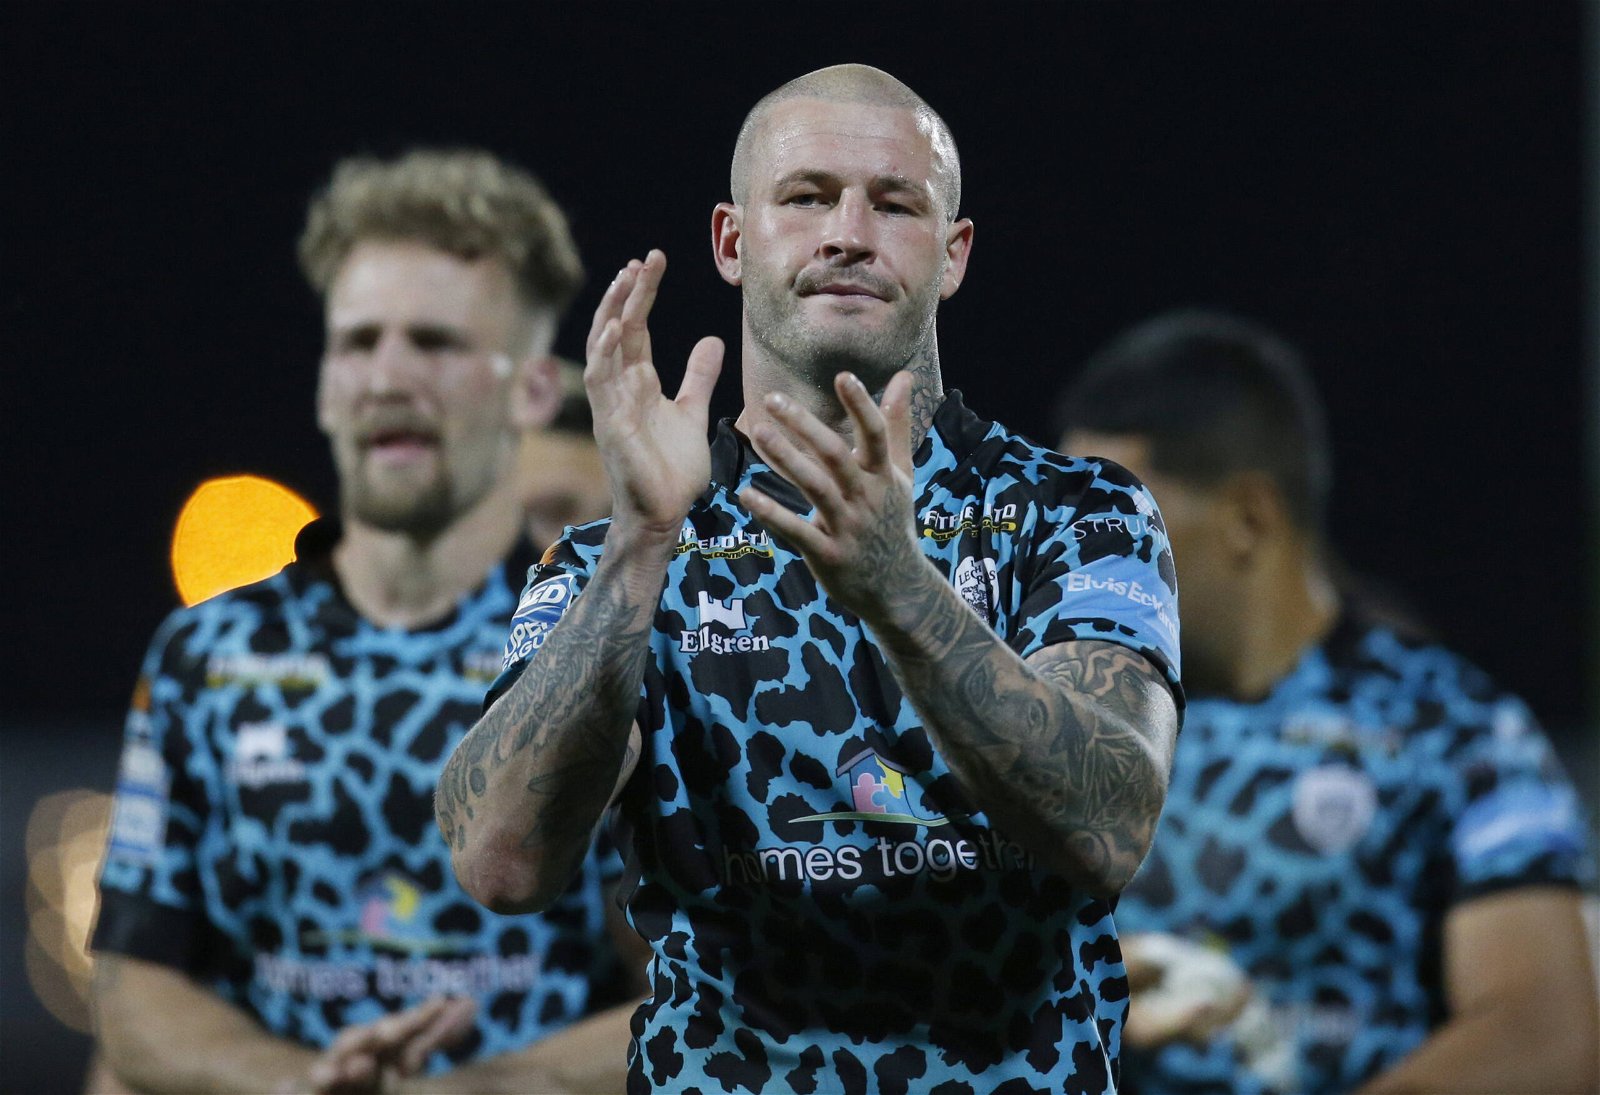 Zak Hardaker was in court this morning to plead guilty to drink driving, for which he has been banned for three years.